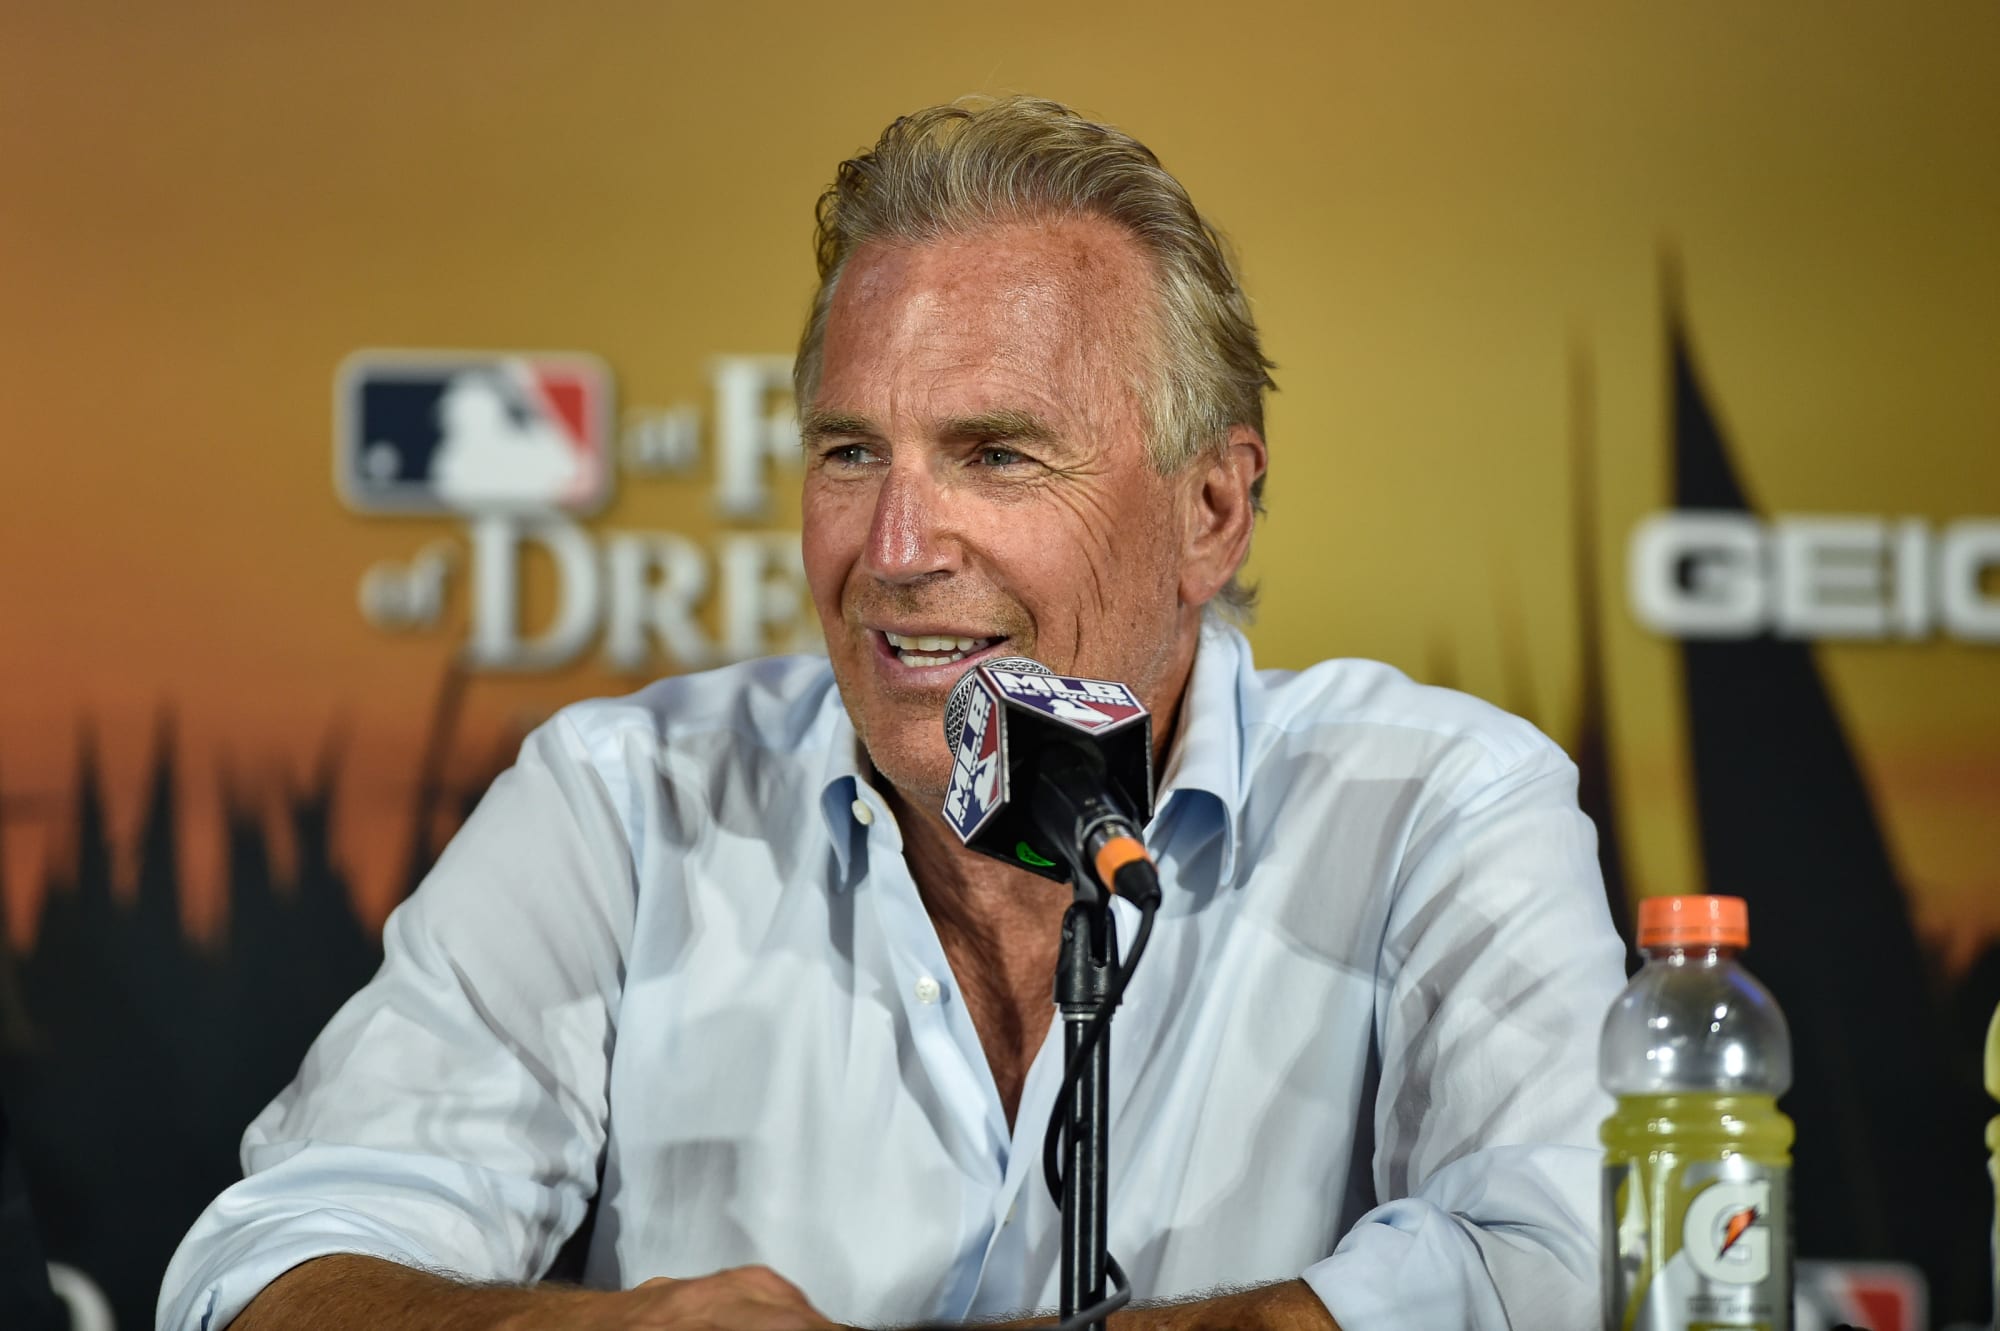 Kevin Costner baseball movies ranked from best to worst